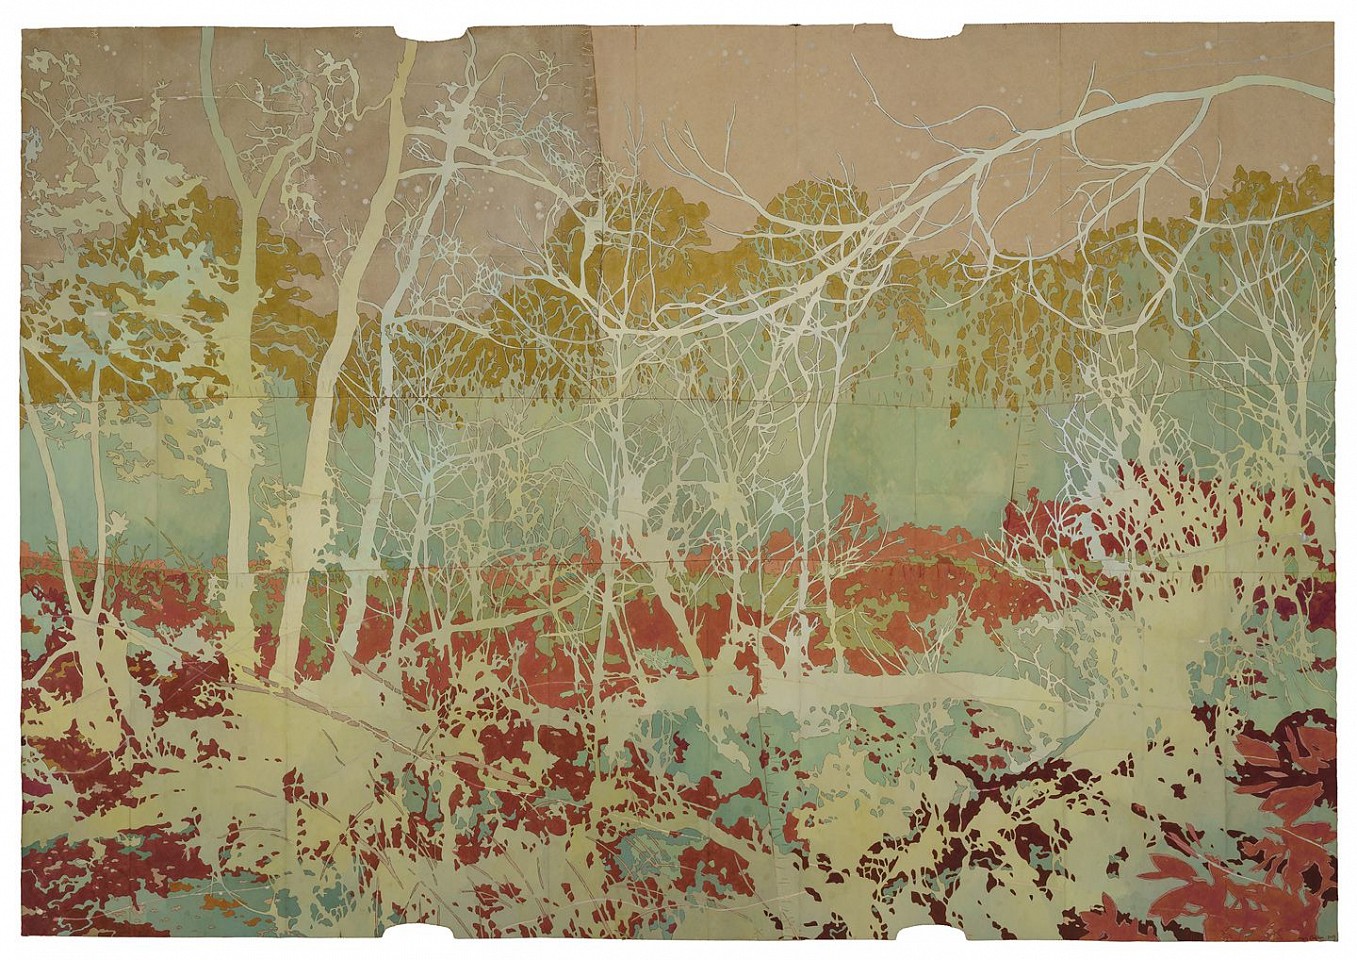 Maysey Craddock
from the remnant, a new field, 2023
CRADD103
gouache, flashe, and thread on found paper, 40 x 58 inches / 45 1/2 x 63 inches framed
Frame + $3,200.00